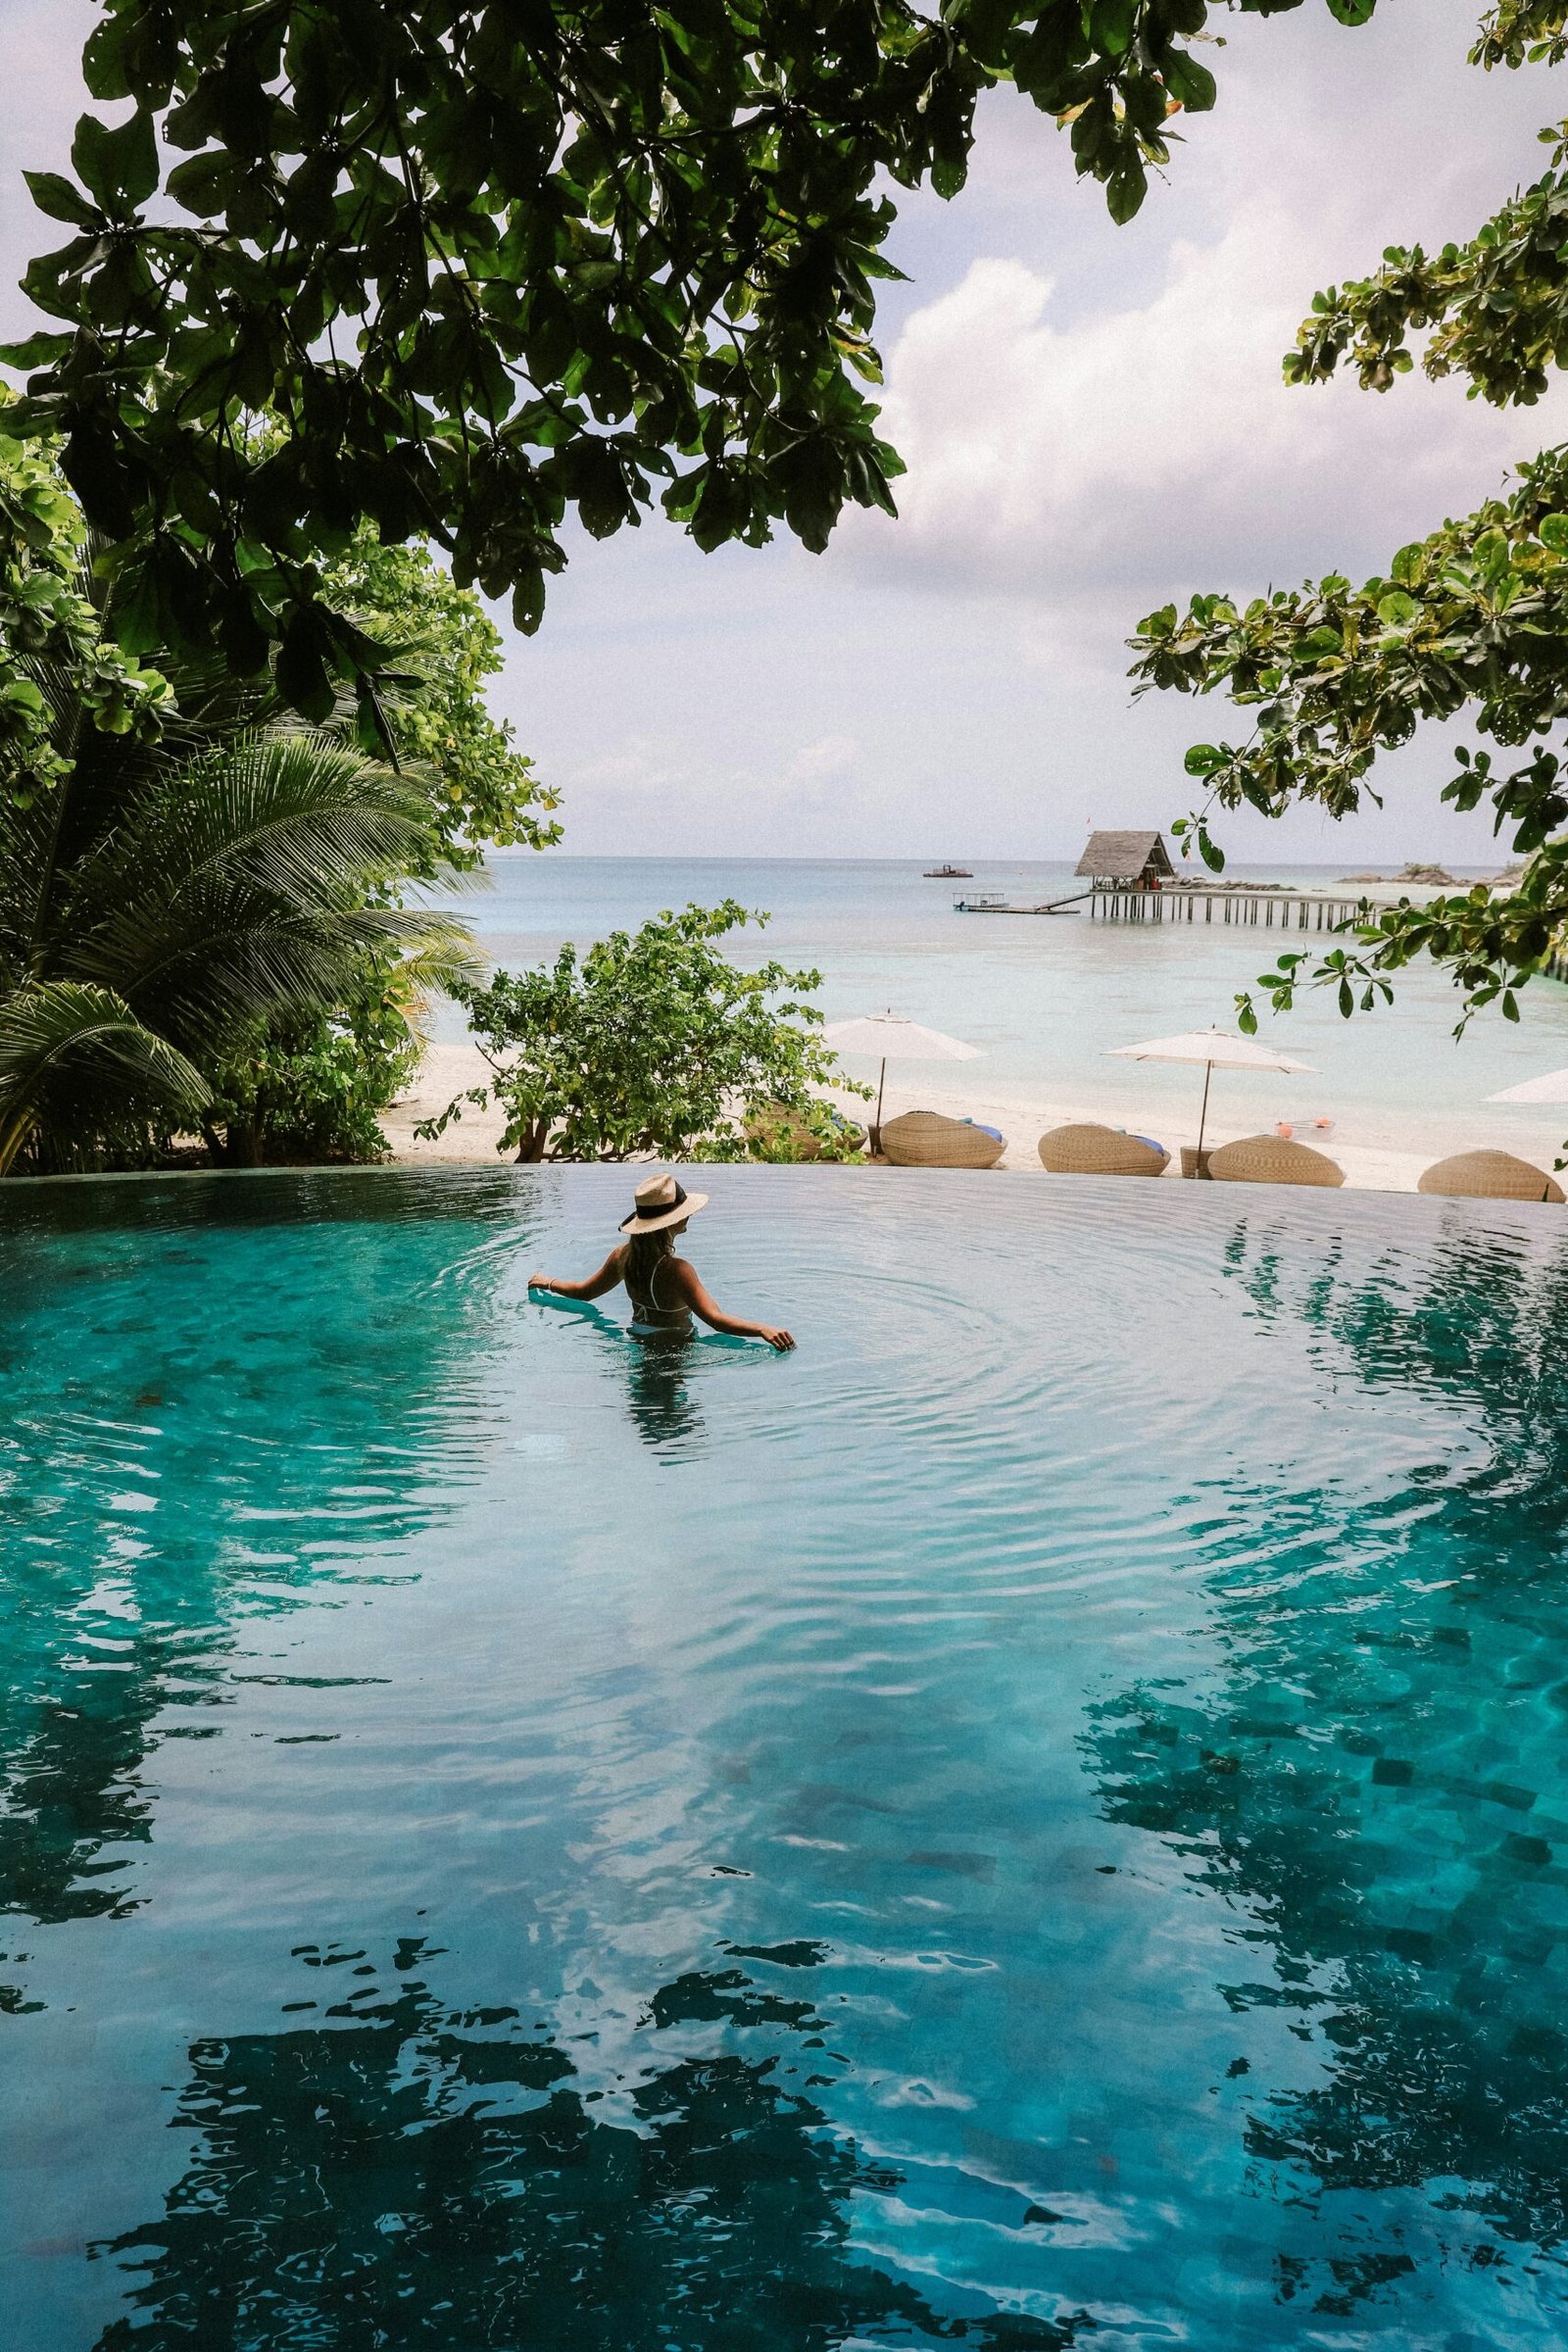 The Maldives with a person in an infinity pool overlooking the ocean. It is one of the Luxury beach vacations you can book with me.